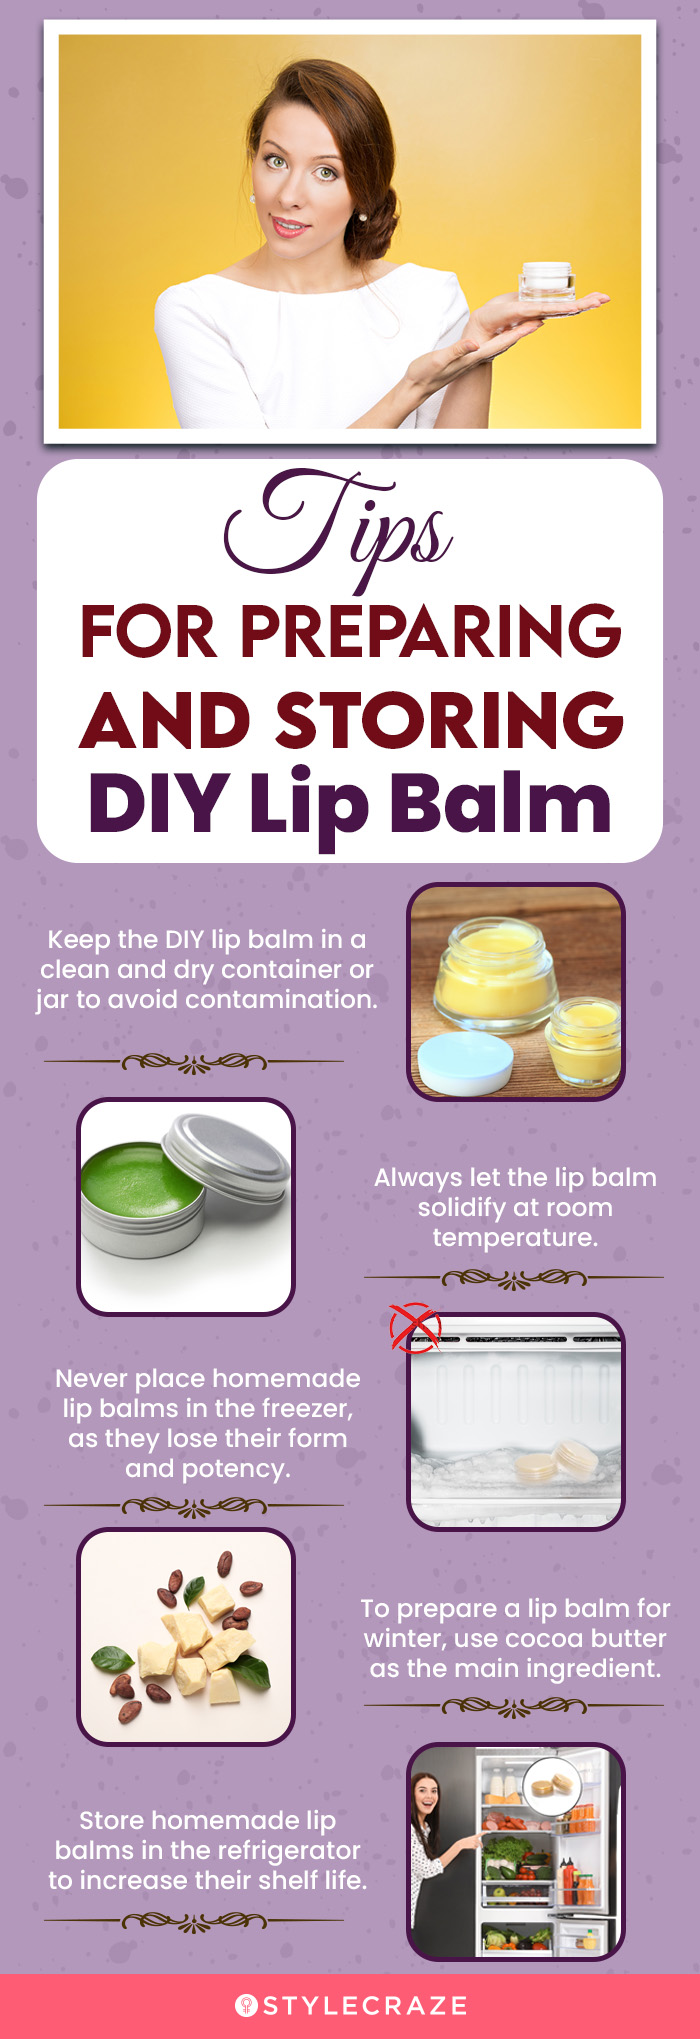 How to make an olive oil-based lip balm at home without using paraffin  waxes or other harmful chemicals/additives that I might find in commercial  brands - Quora